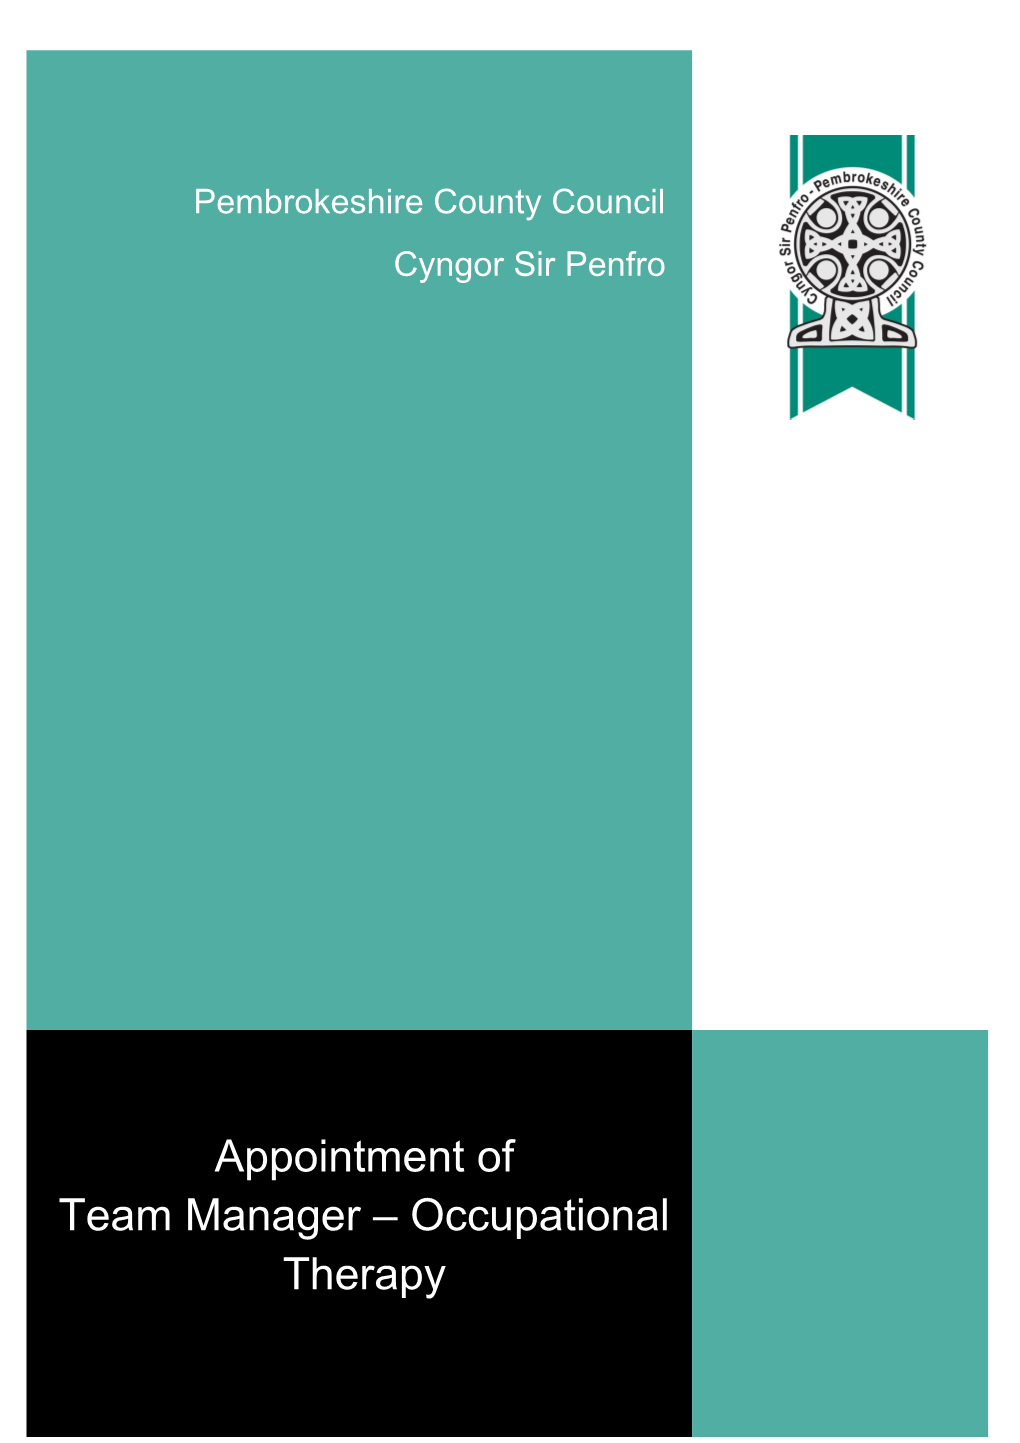 Team Manager Occupational Therapy